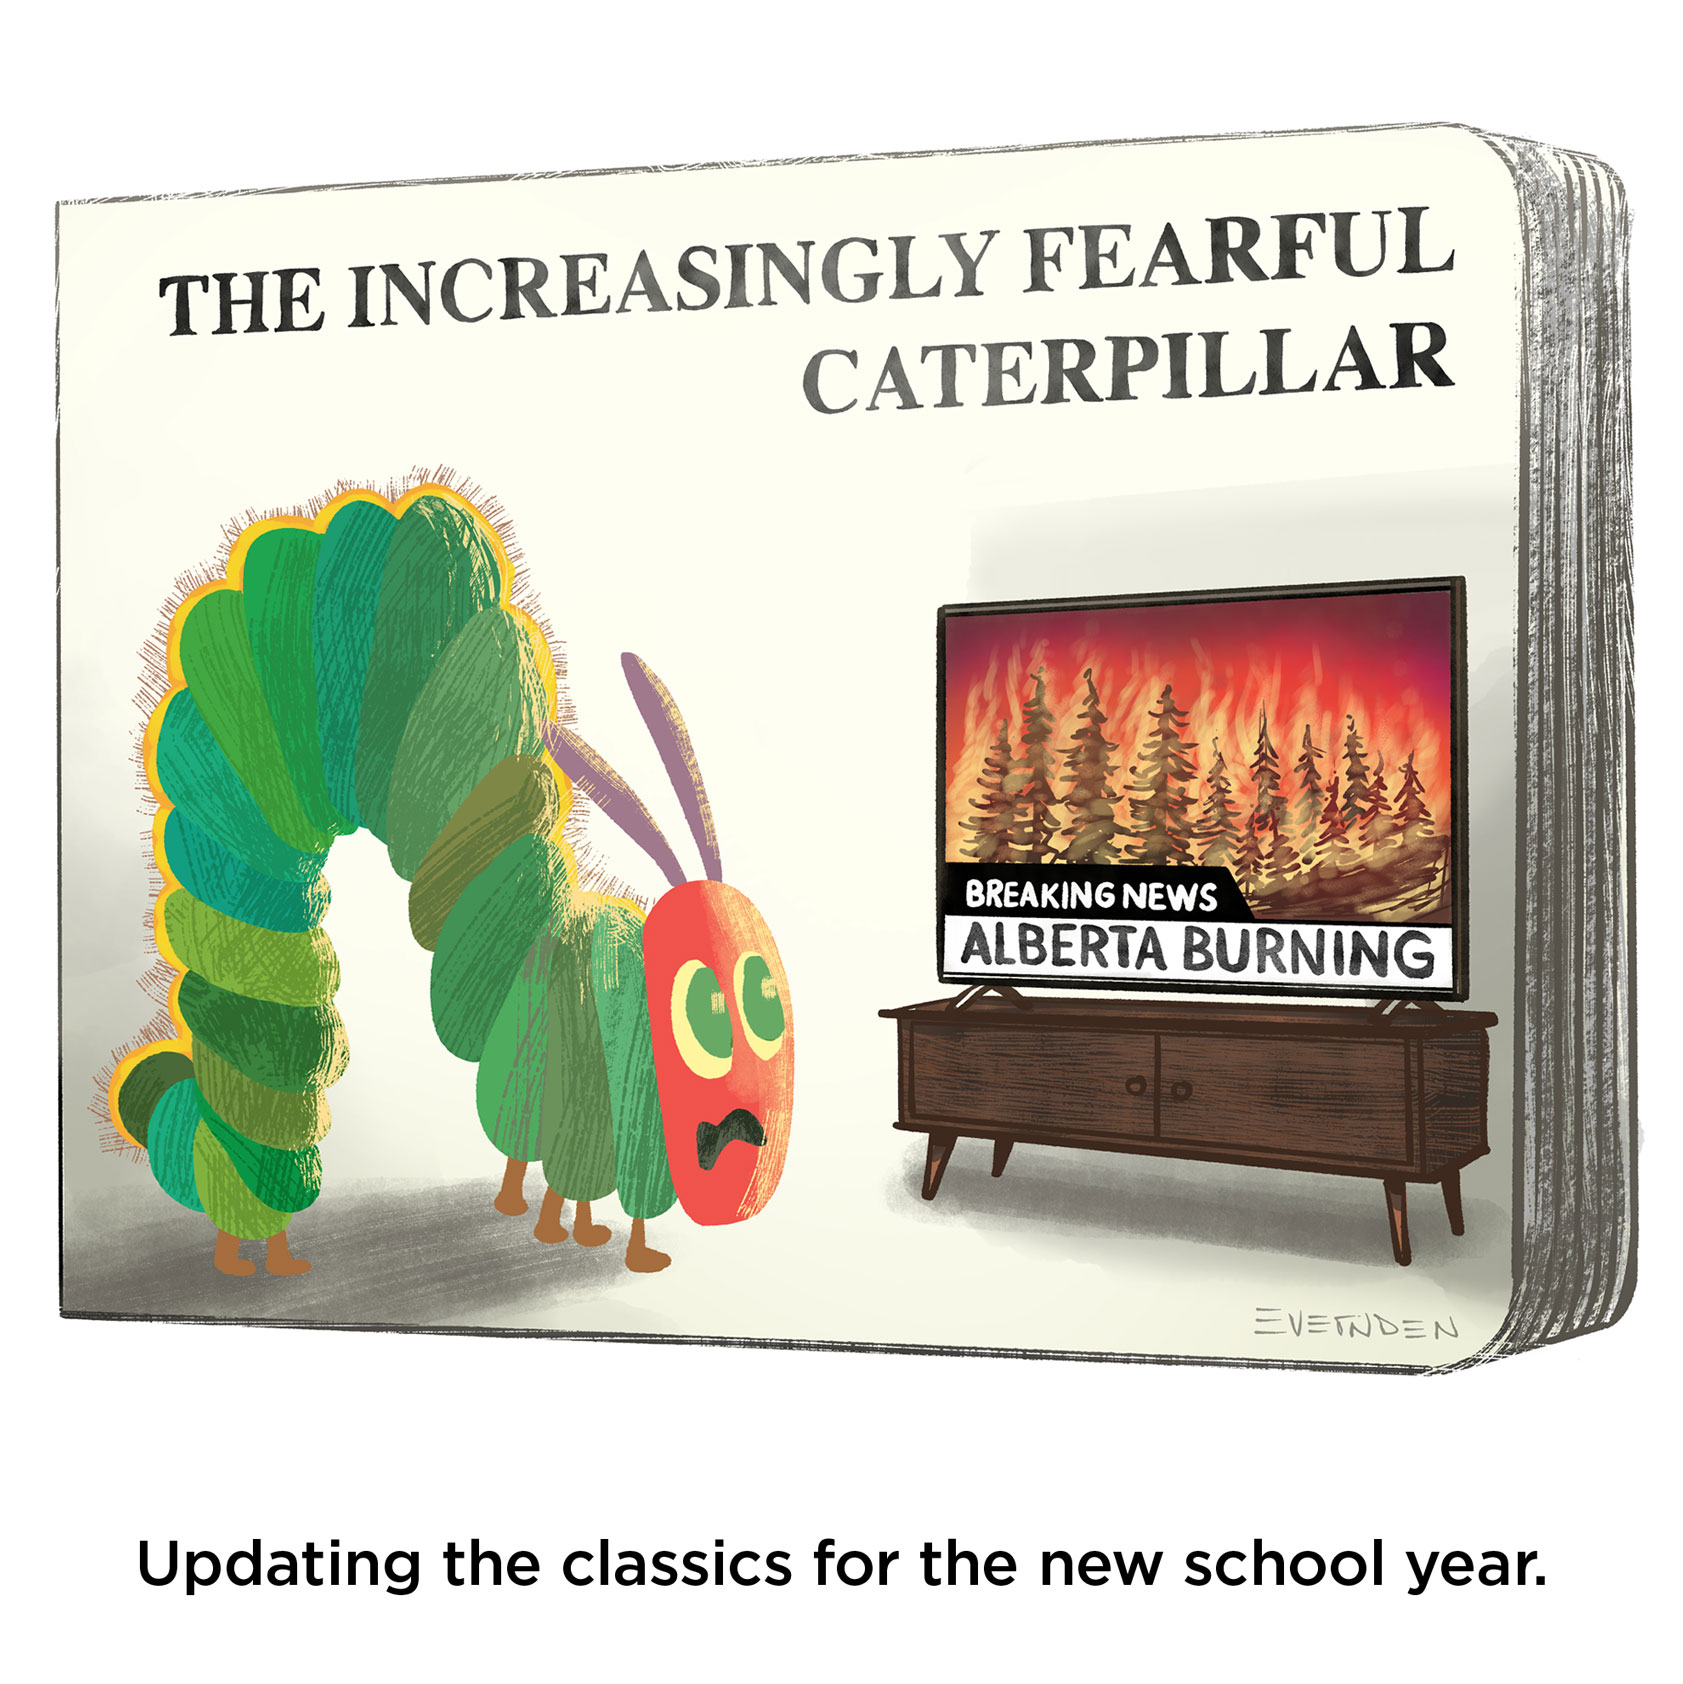 An illustraton of a children’s board book titled “The Increasingy Fearful Caterpillar”. The cover has a caterpillar watching a TV which displays a forest fire and the headline “Breaking News Alberta Burning”. Below the board book is the caption, “Updating the classics for the new school year."